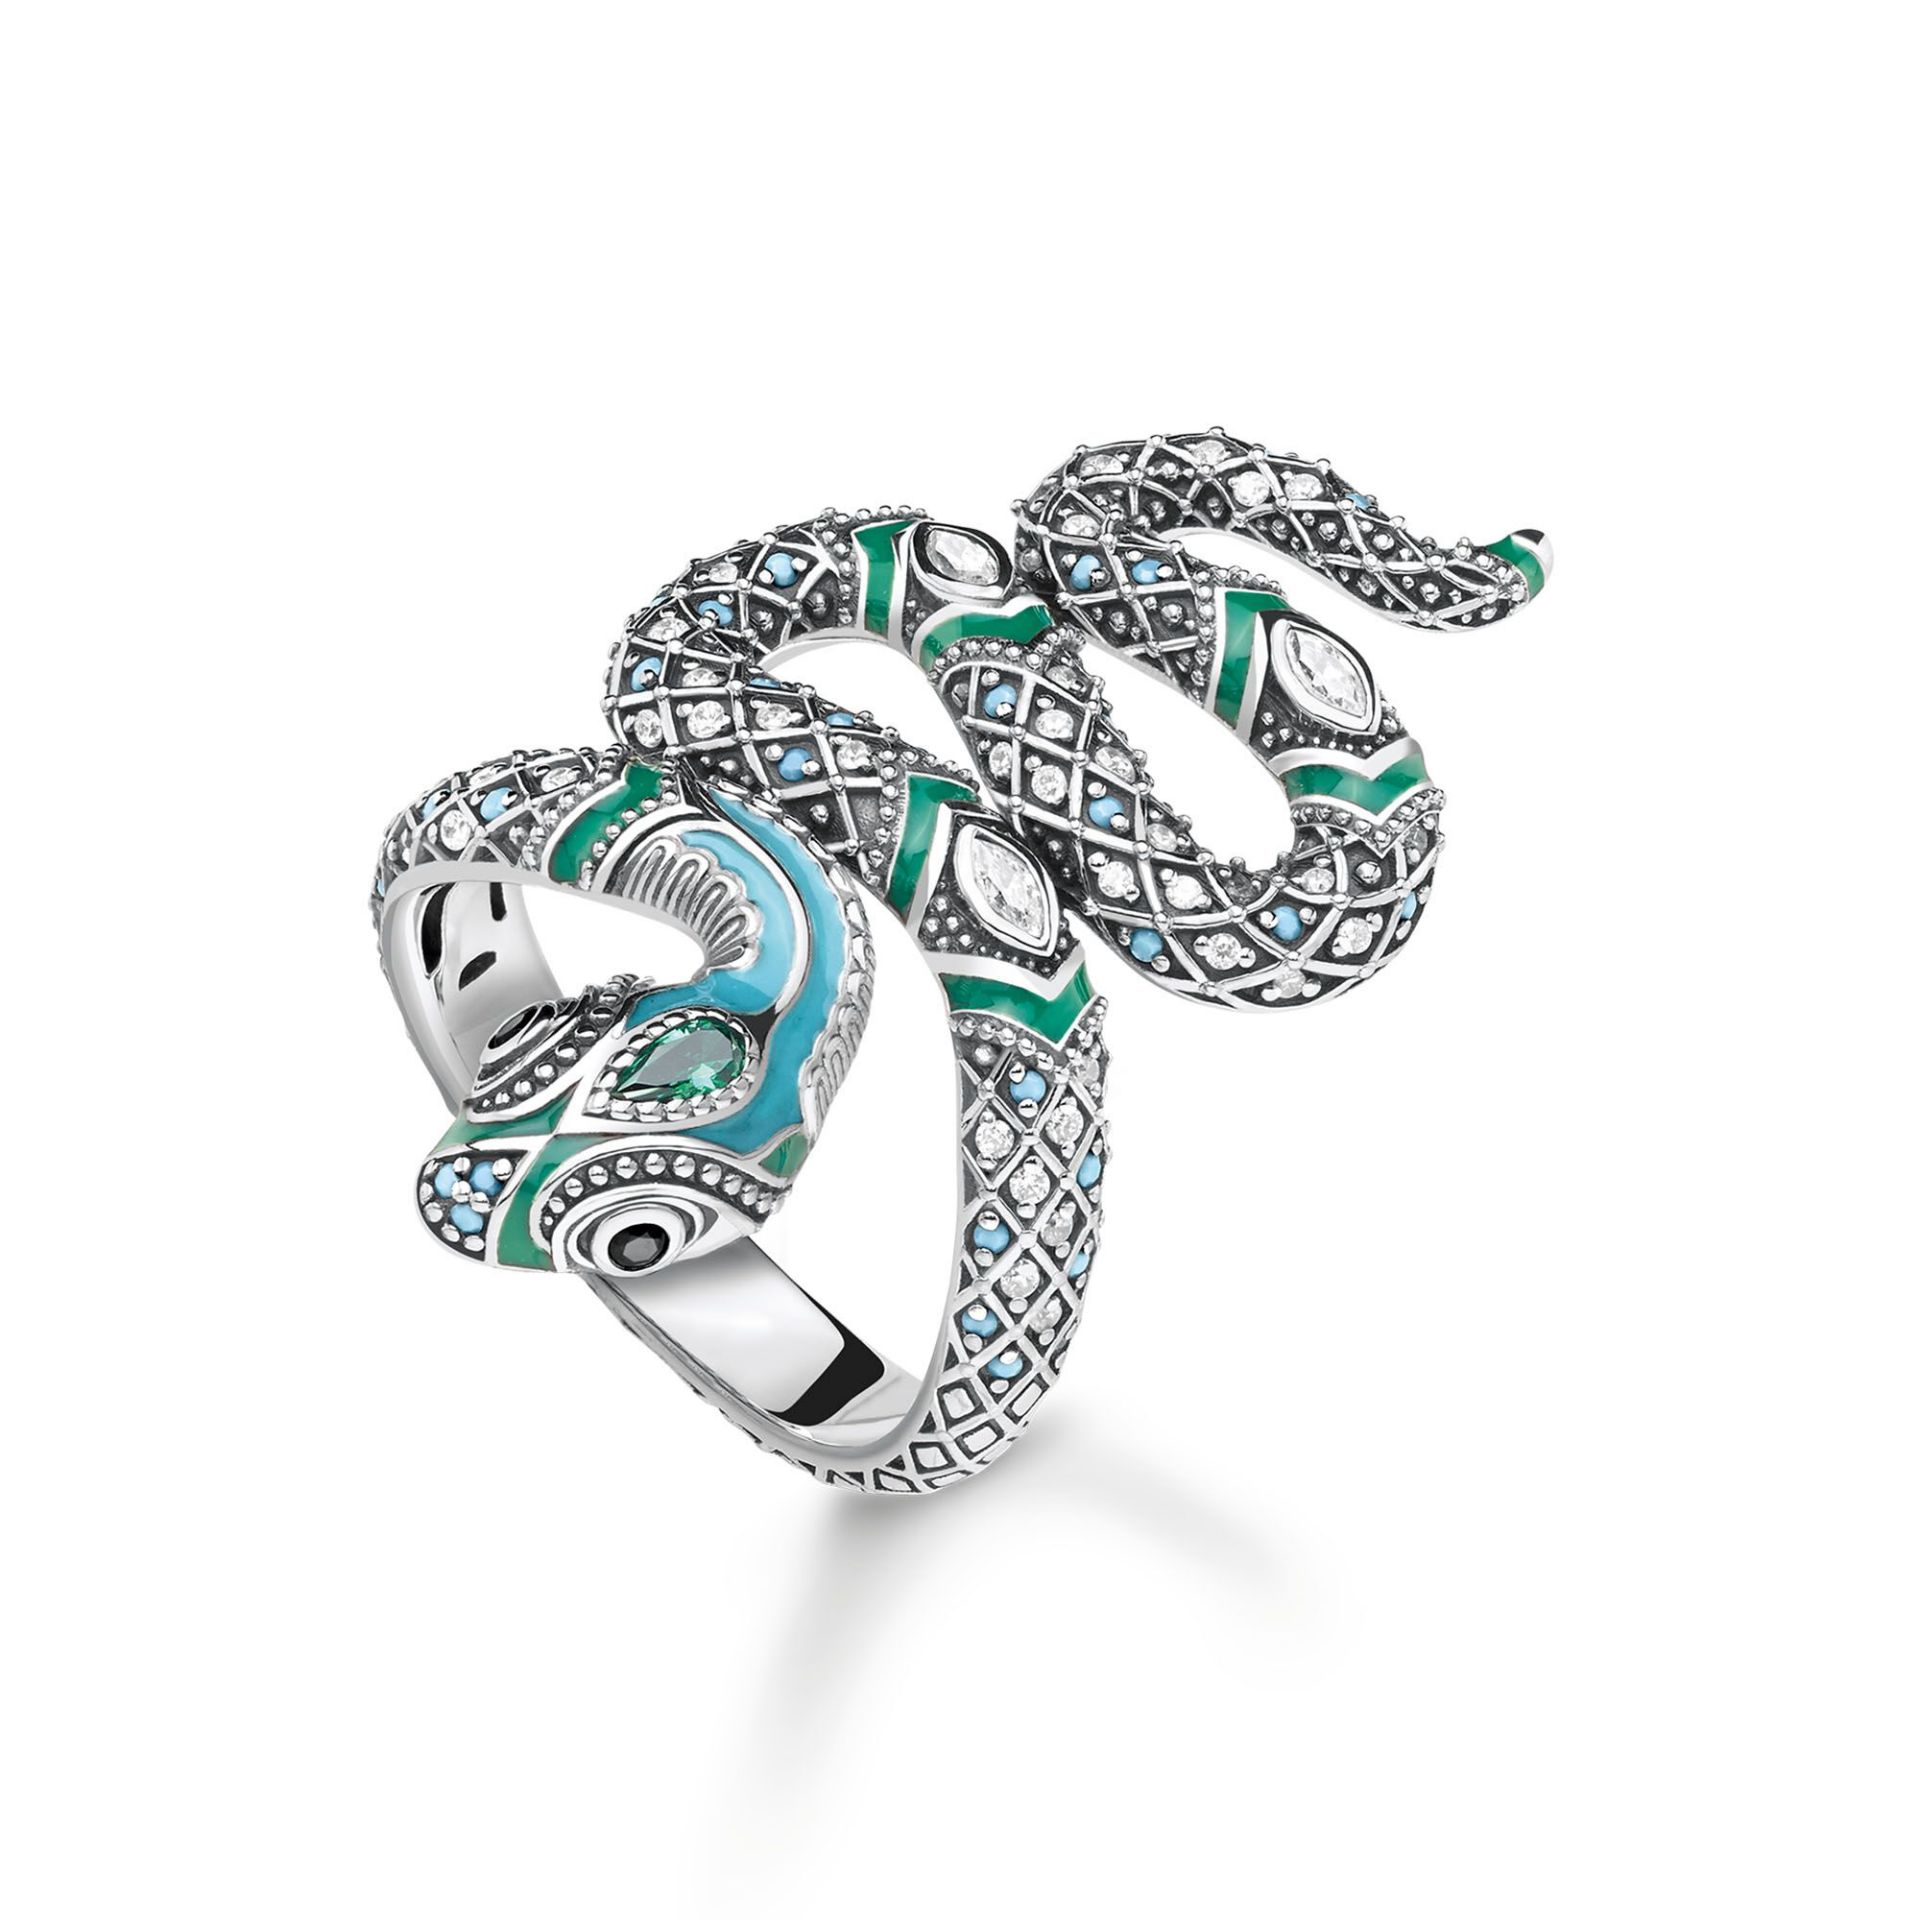 Stock of 3 Designer Jewellery Stores | Cost Price £292,528.92 | New & Ex-Display - See stock lists - Image 8 of 27